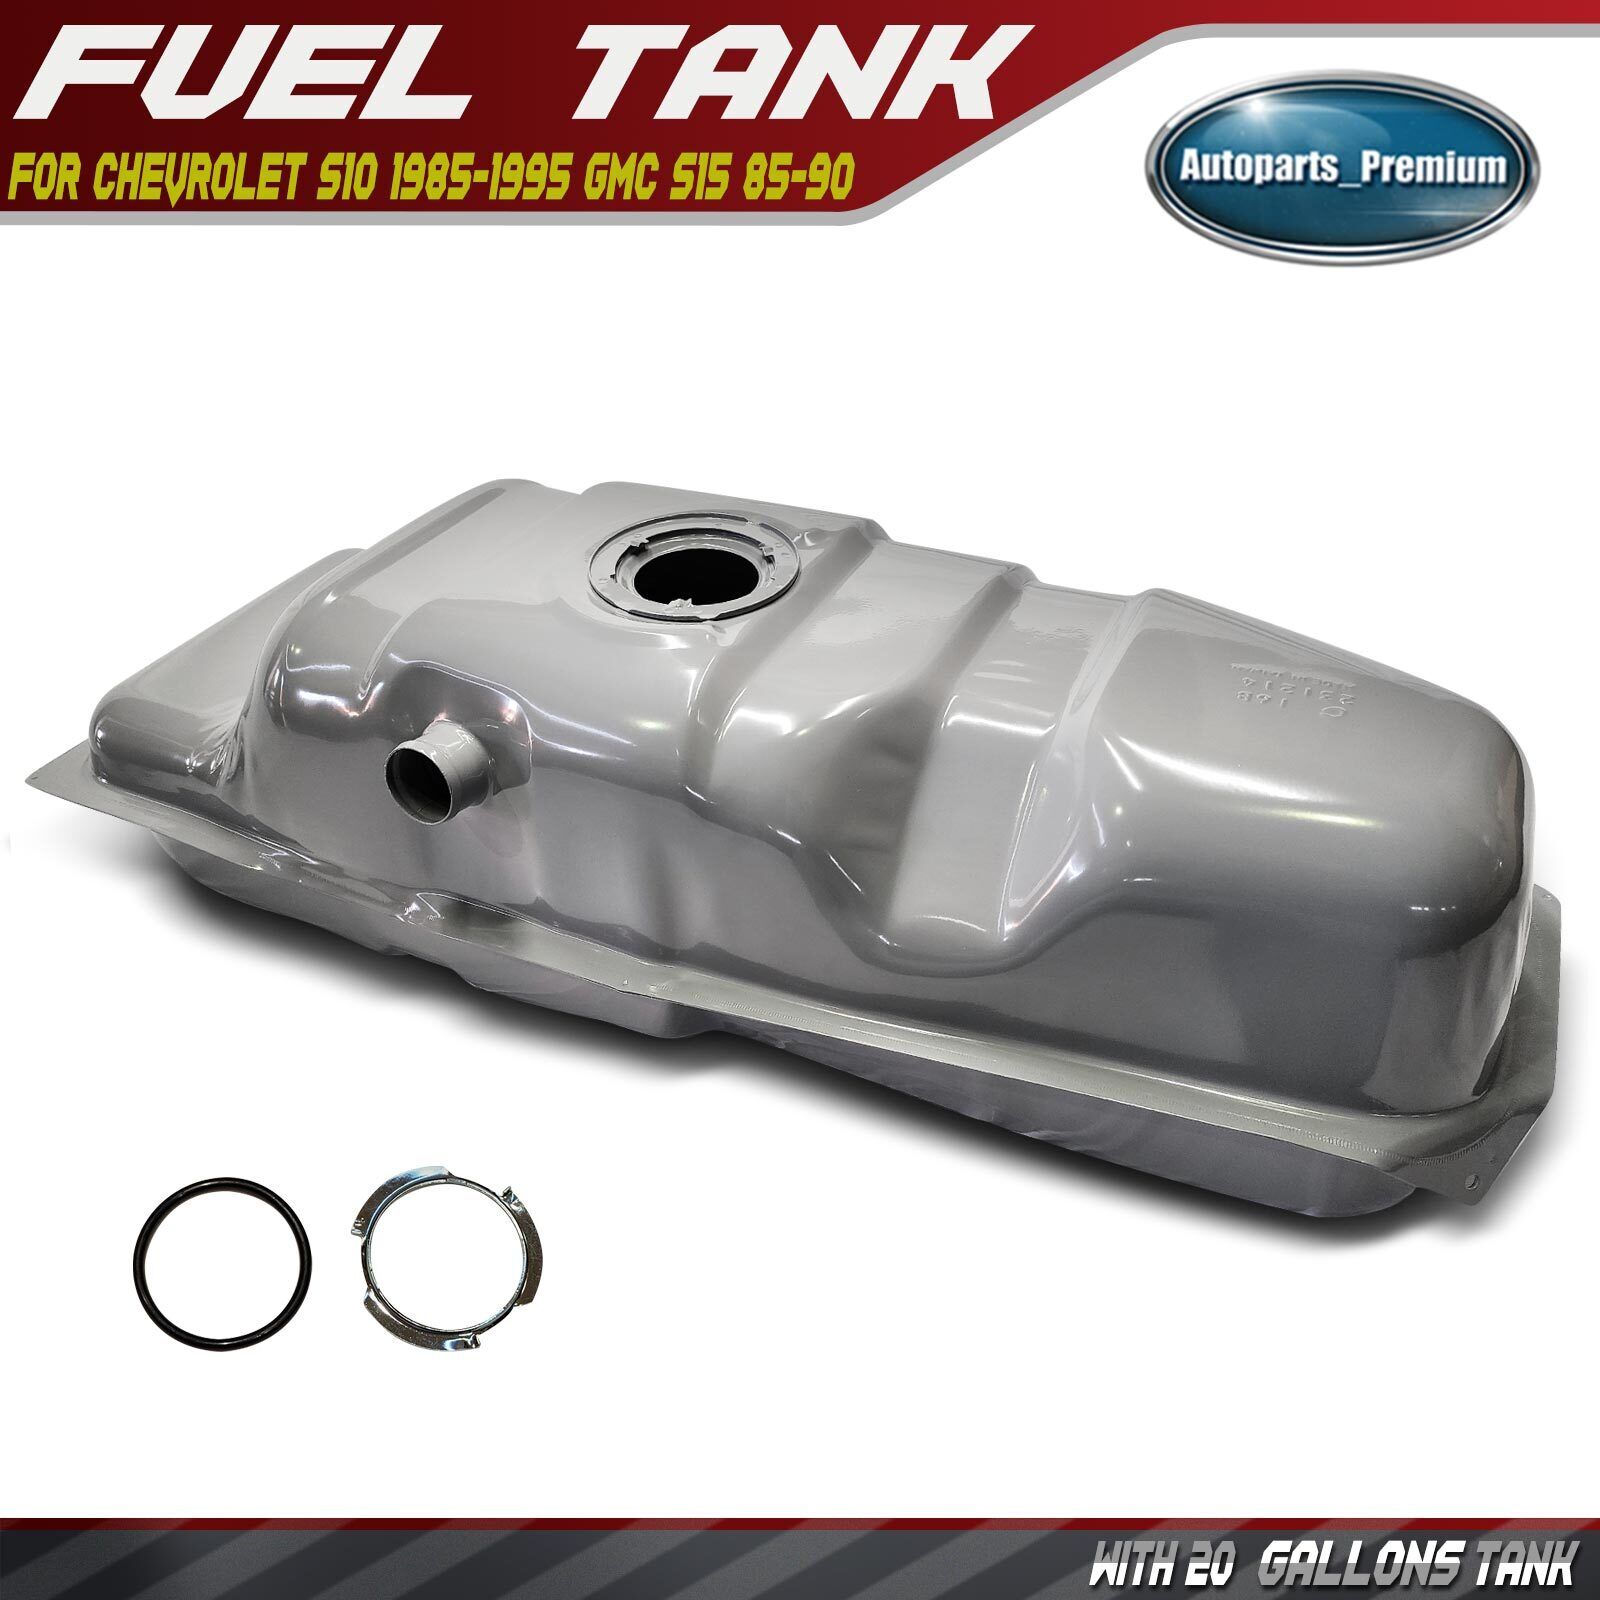 20 Gallons Fuel Tank for Chevrolet S10 1985-1995 GMC S15 1985-1990 Syclone 1991